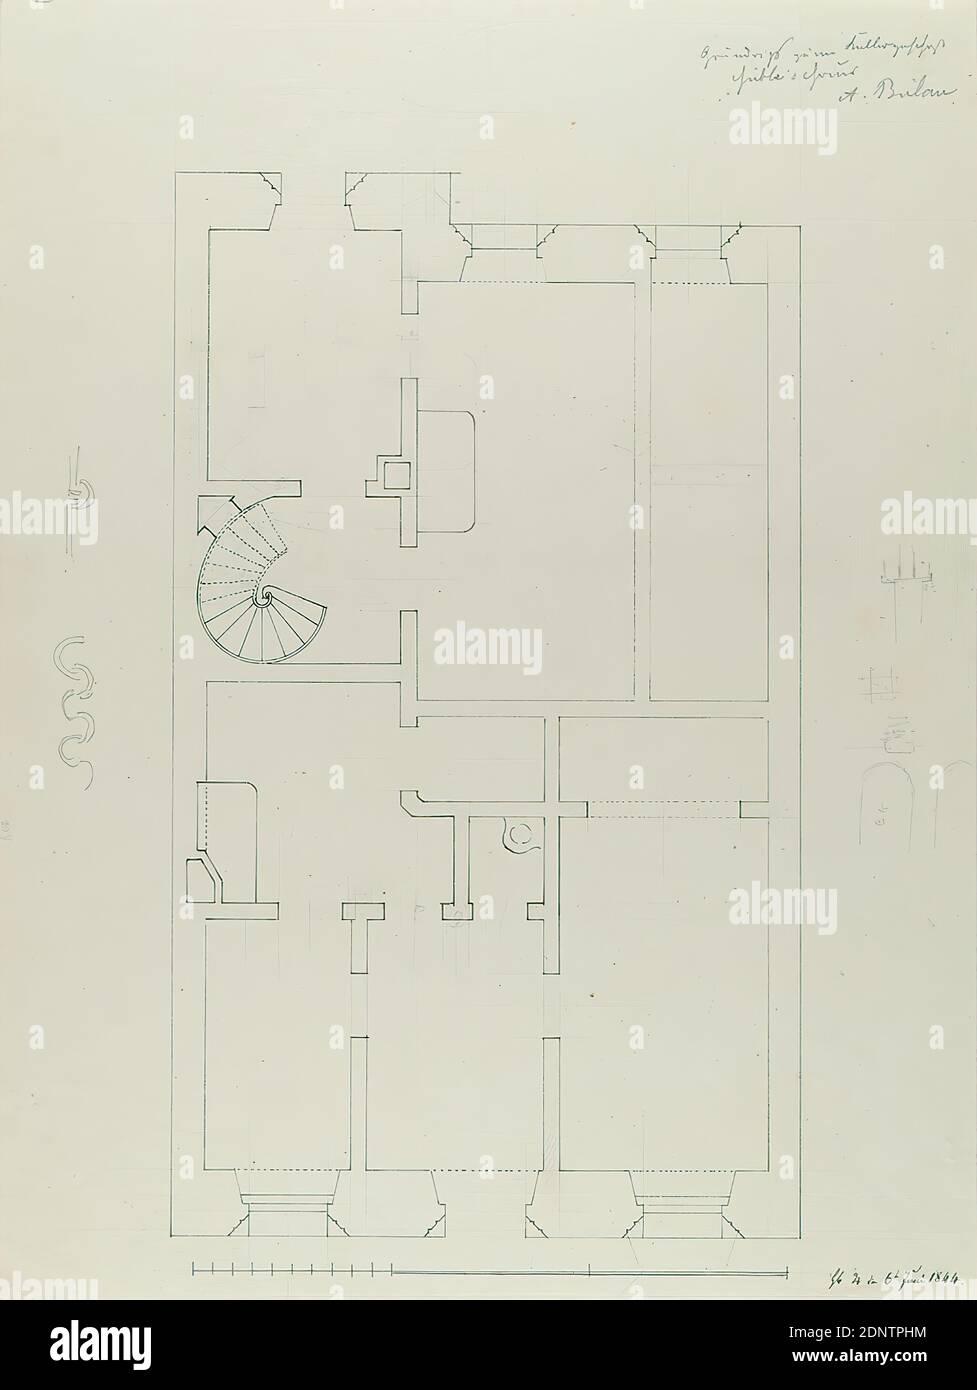 Theodor Bülau, Hübbe'sche Haus, Ferdinandstr. 65, Hamburg. Floor plan of the basement, paper, pen, ink, pencil, pen drawing, sheet size: height: 34,5 cm; width: 26 cm, inscribed and dated: recto: in ink: Hb. ♄ [Saturn symbol] the 6th of June 1844, inscribed: recto: in lead: ground plan of the basement, Hübbe's house, A. Bülau, design drawings, draft, plan of a building, basement, basement, architecture Stock Photo